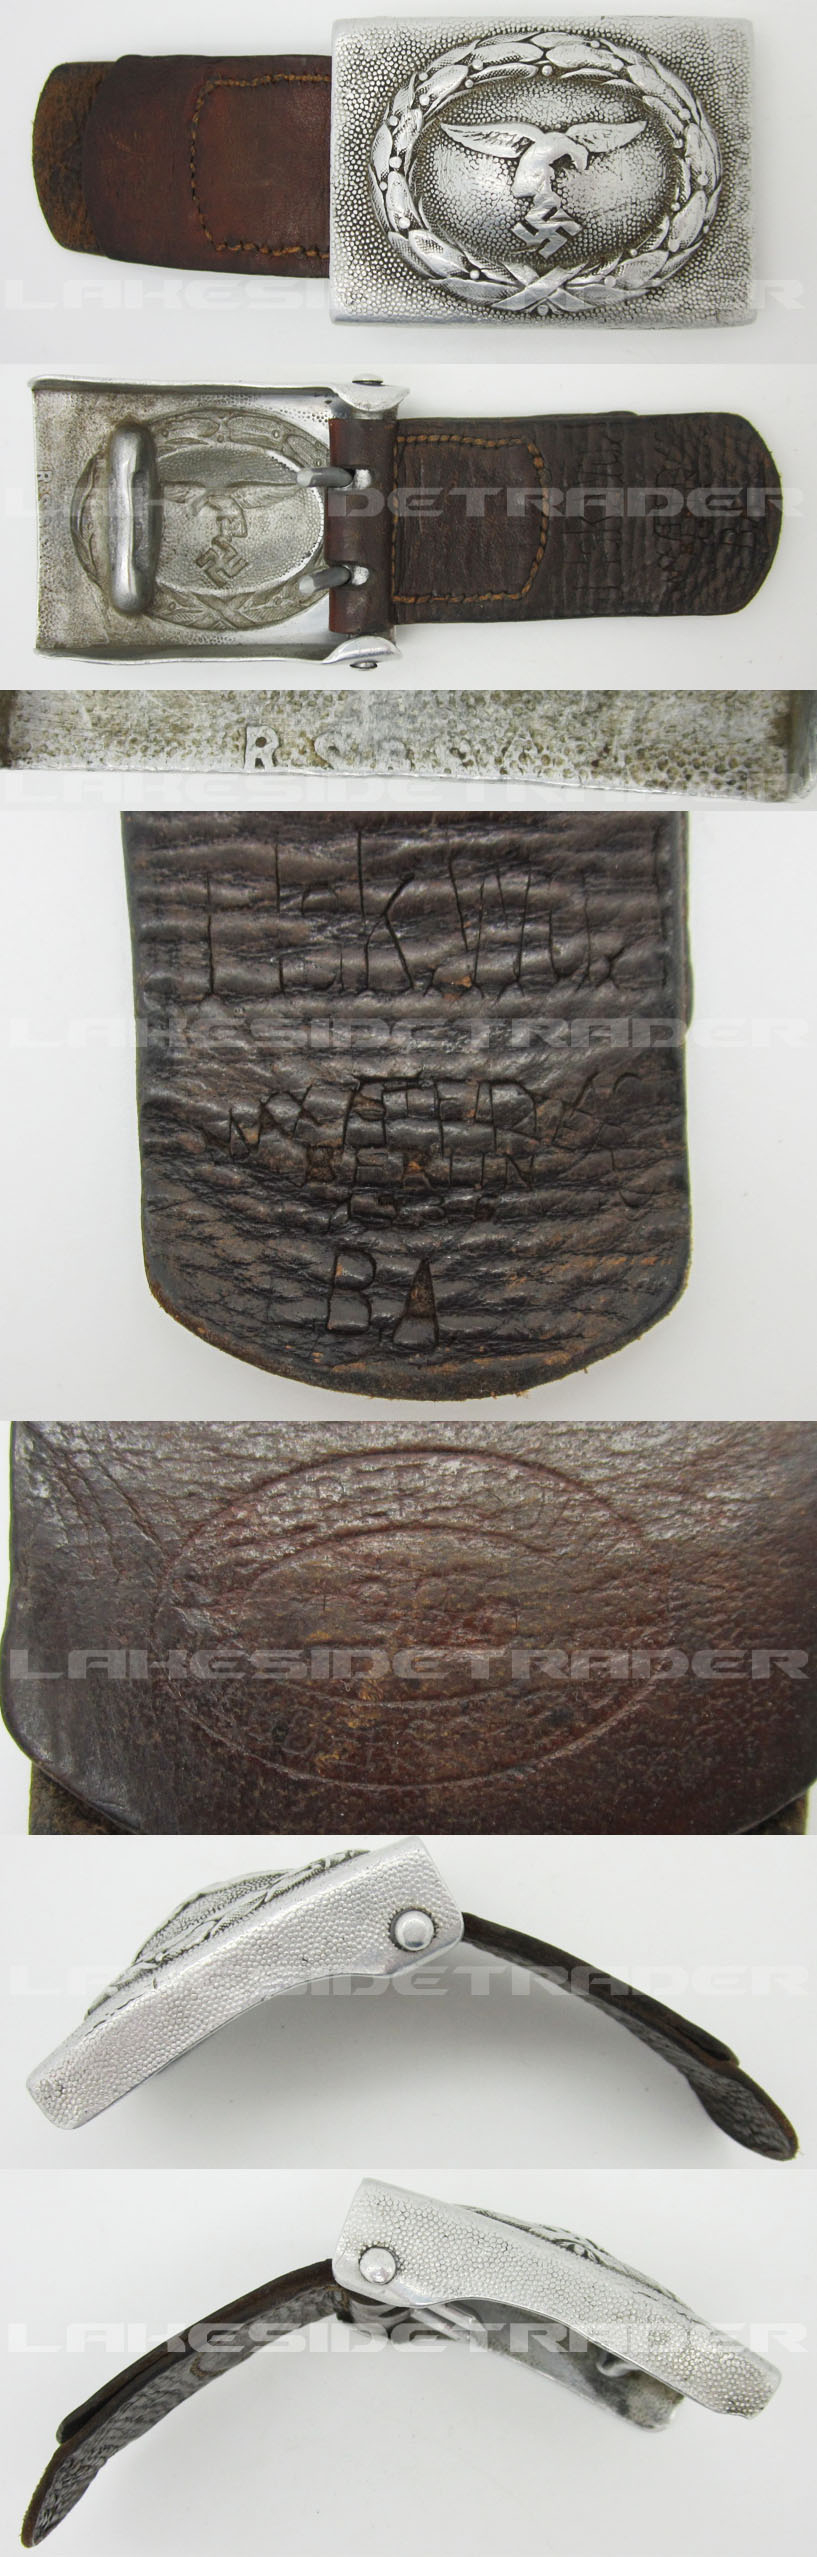 Early Tabbed Luftwaffe Belt Buckle by RS&S 1936